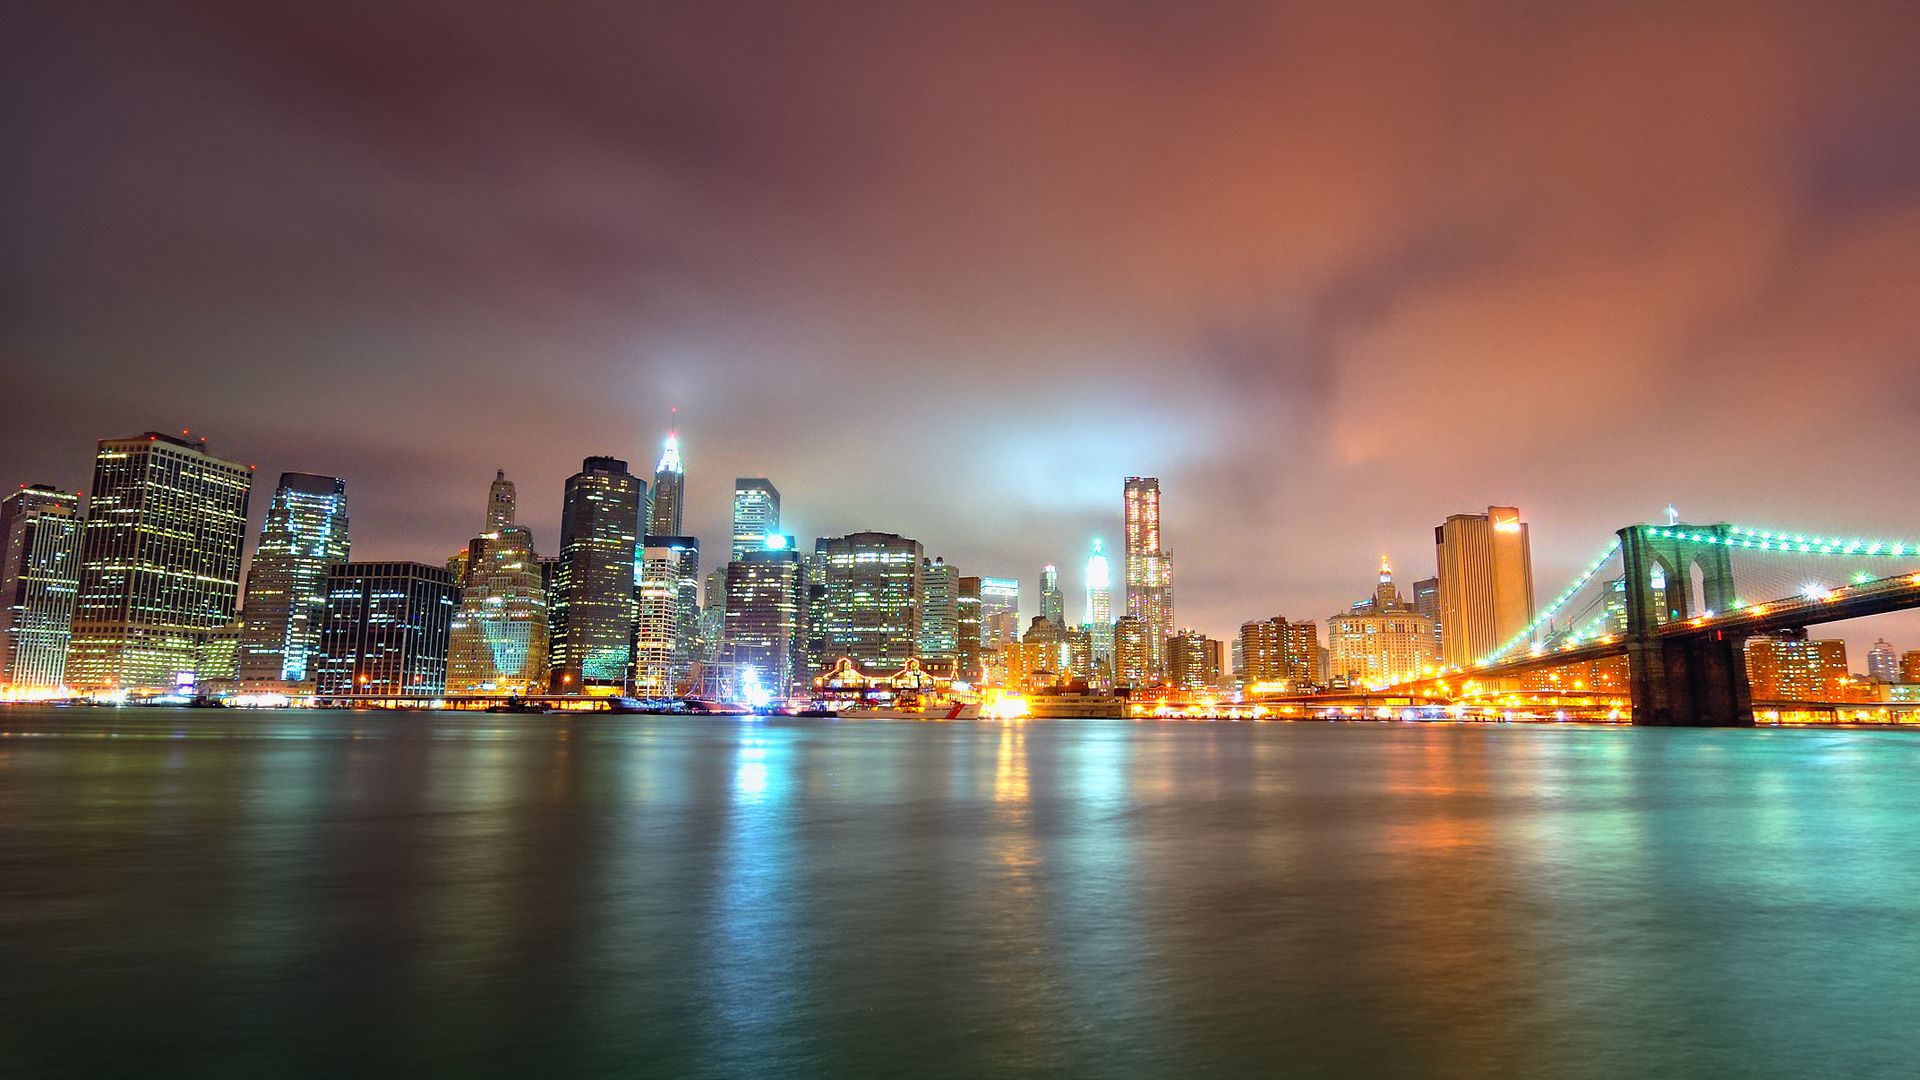 New York City HD Wallpapers Free Download